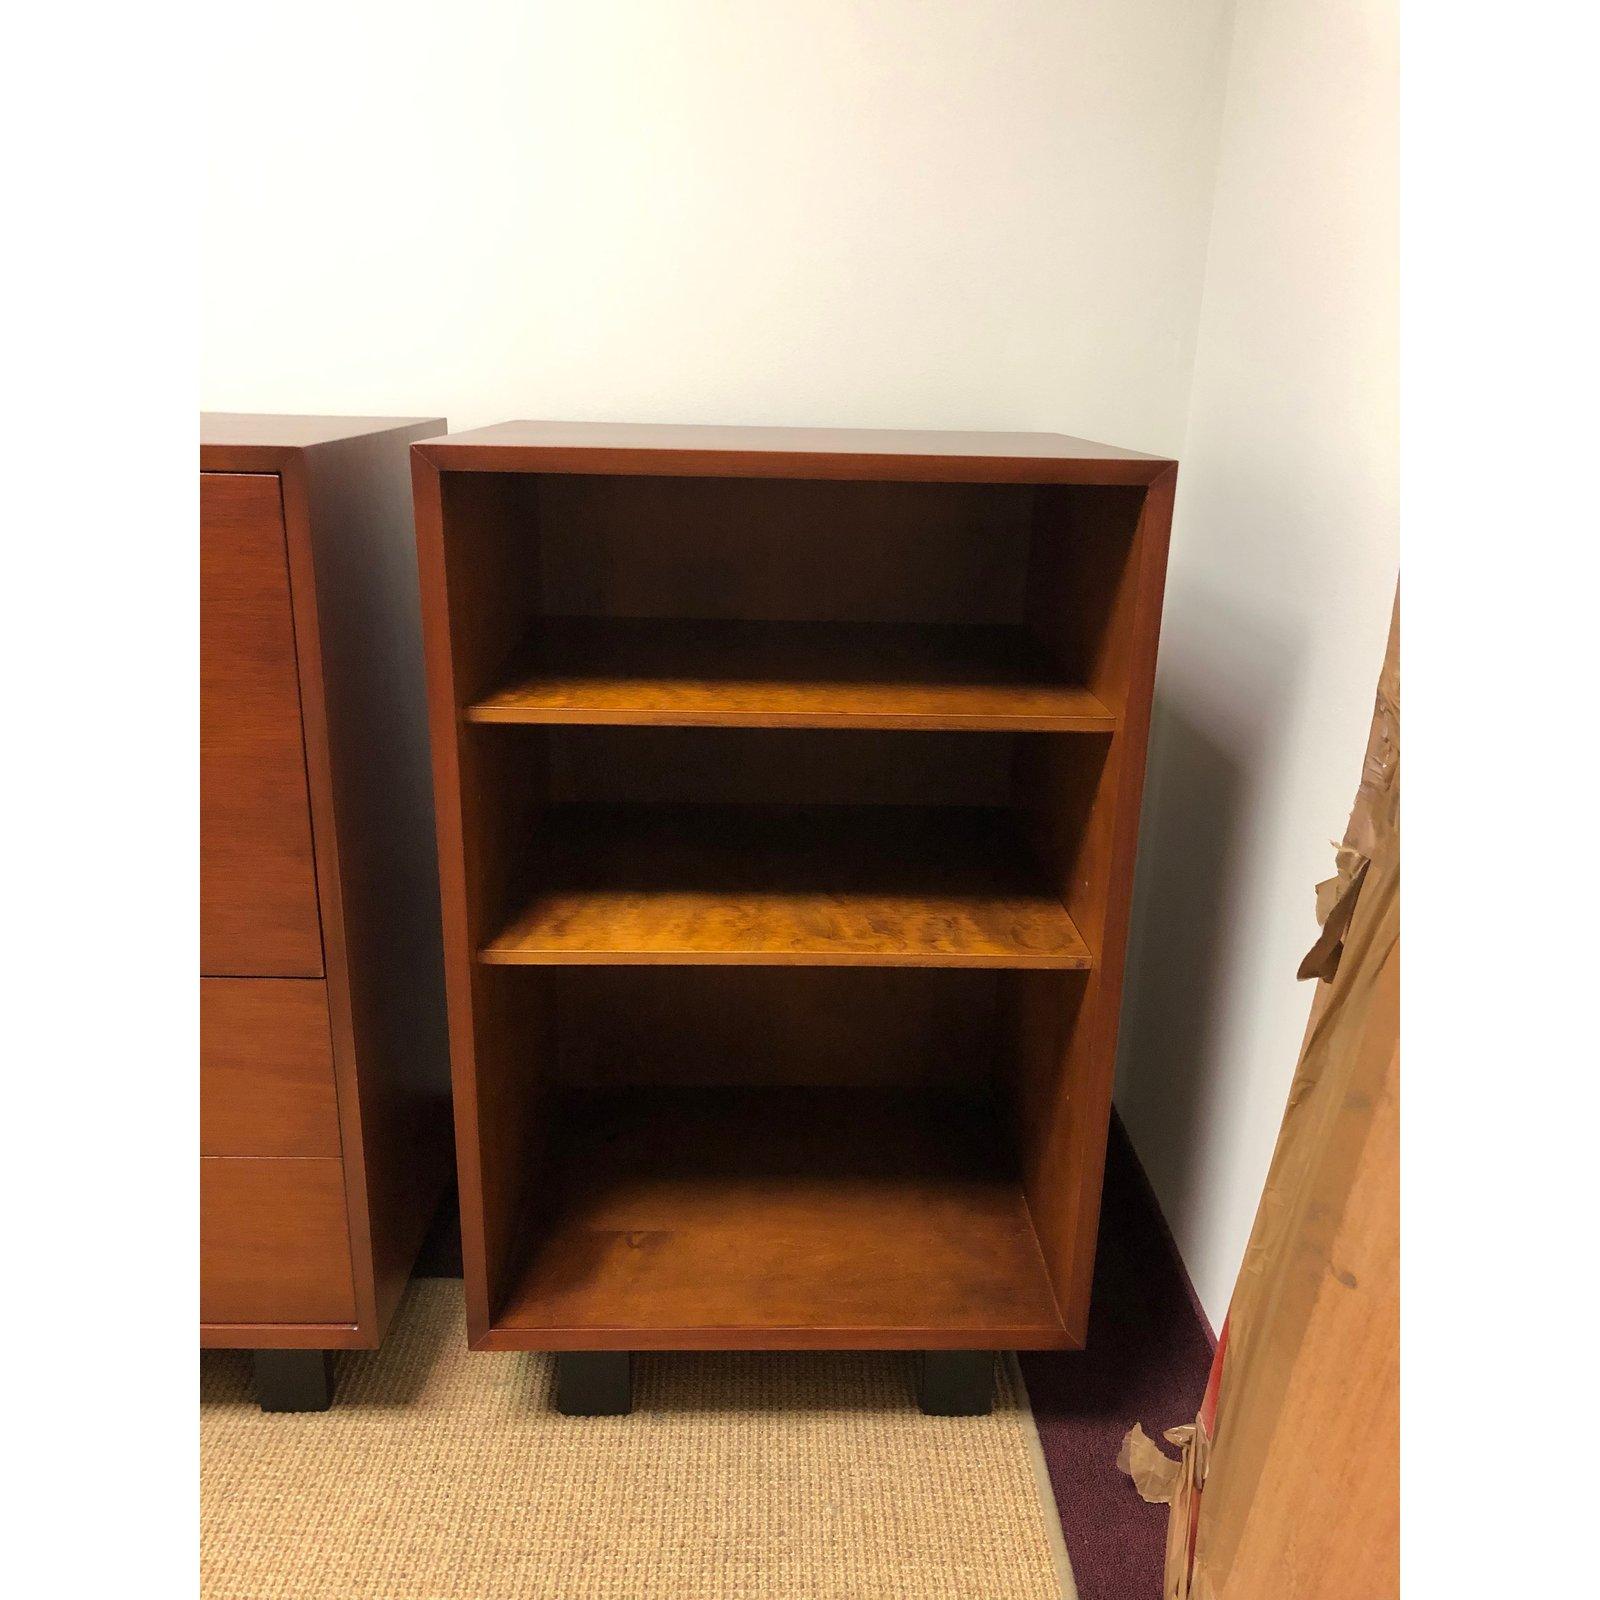 George Nelson walnut secretary with J pulls and open bookcase. Ideally, this set should be on a long Nelson bench because the secretary is too low to function as a desk on the current basic series legs. Secretary by itself is 56.25